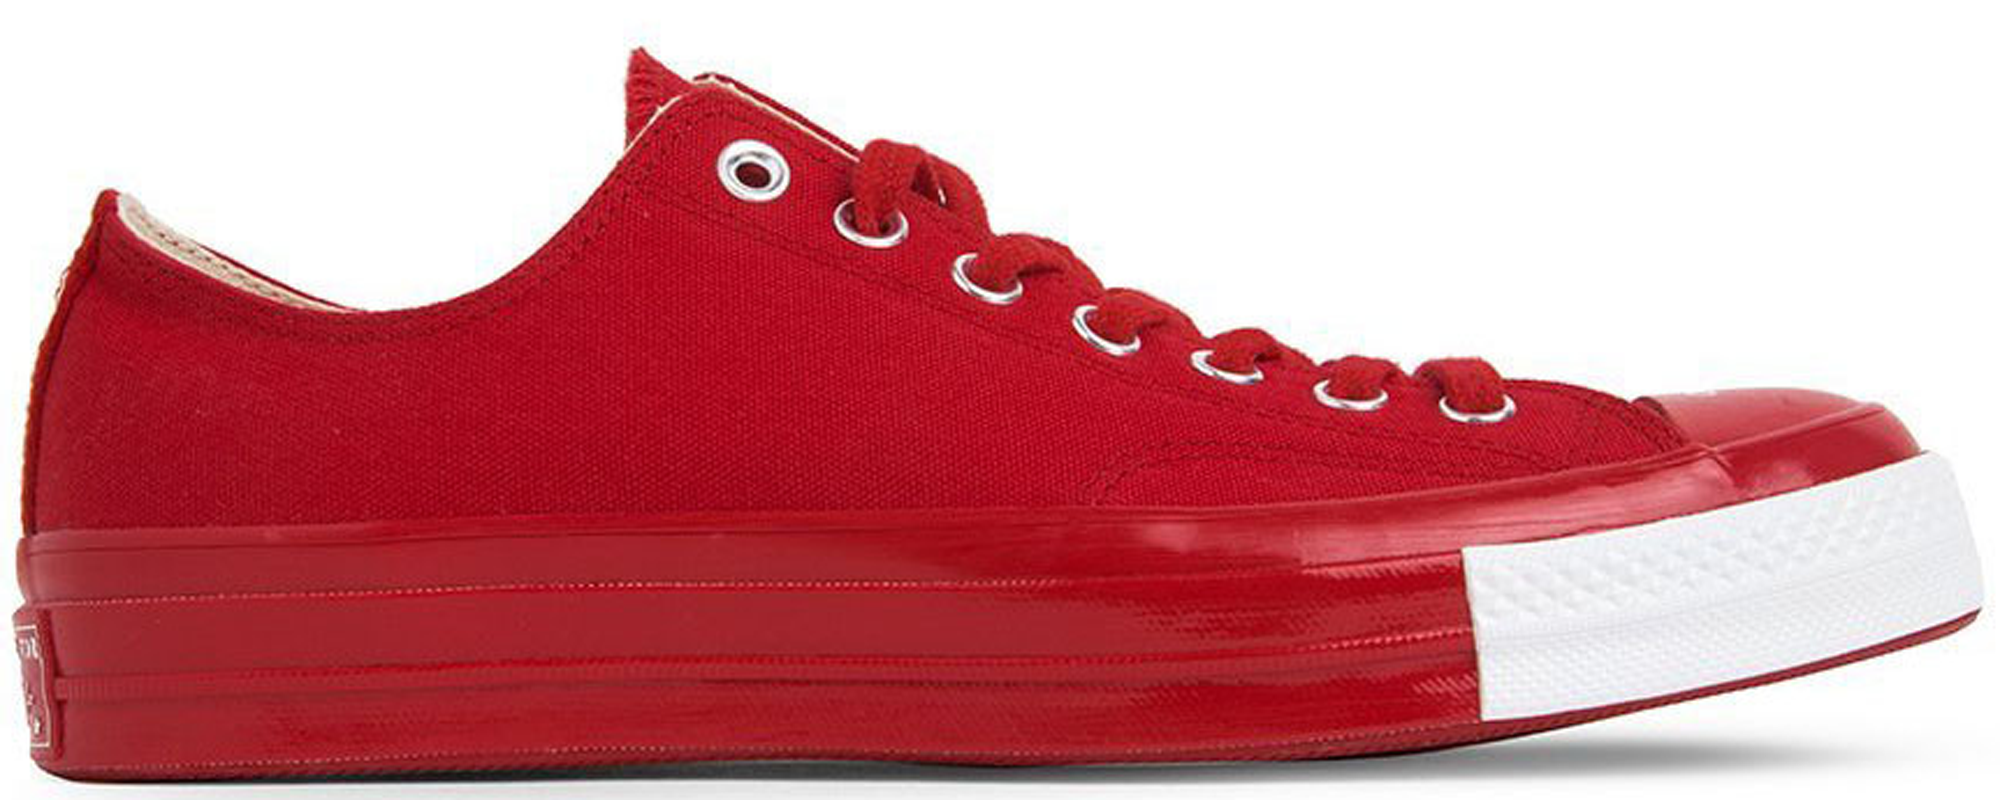 undercover converse red